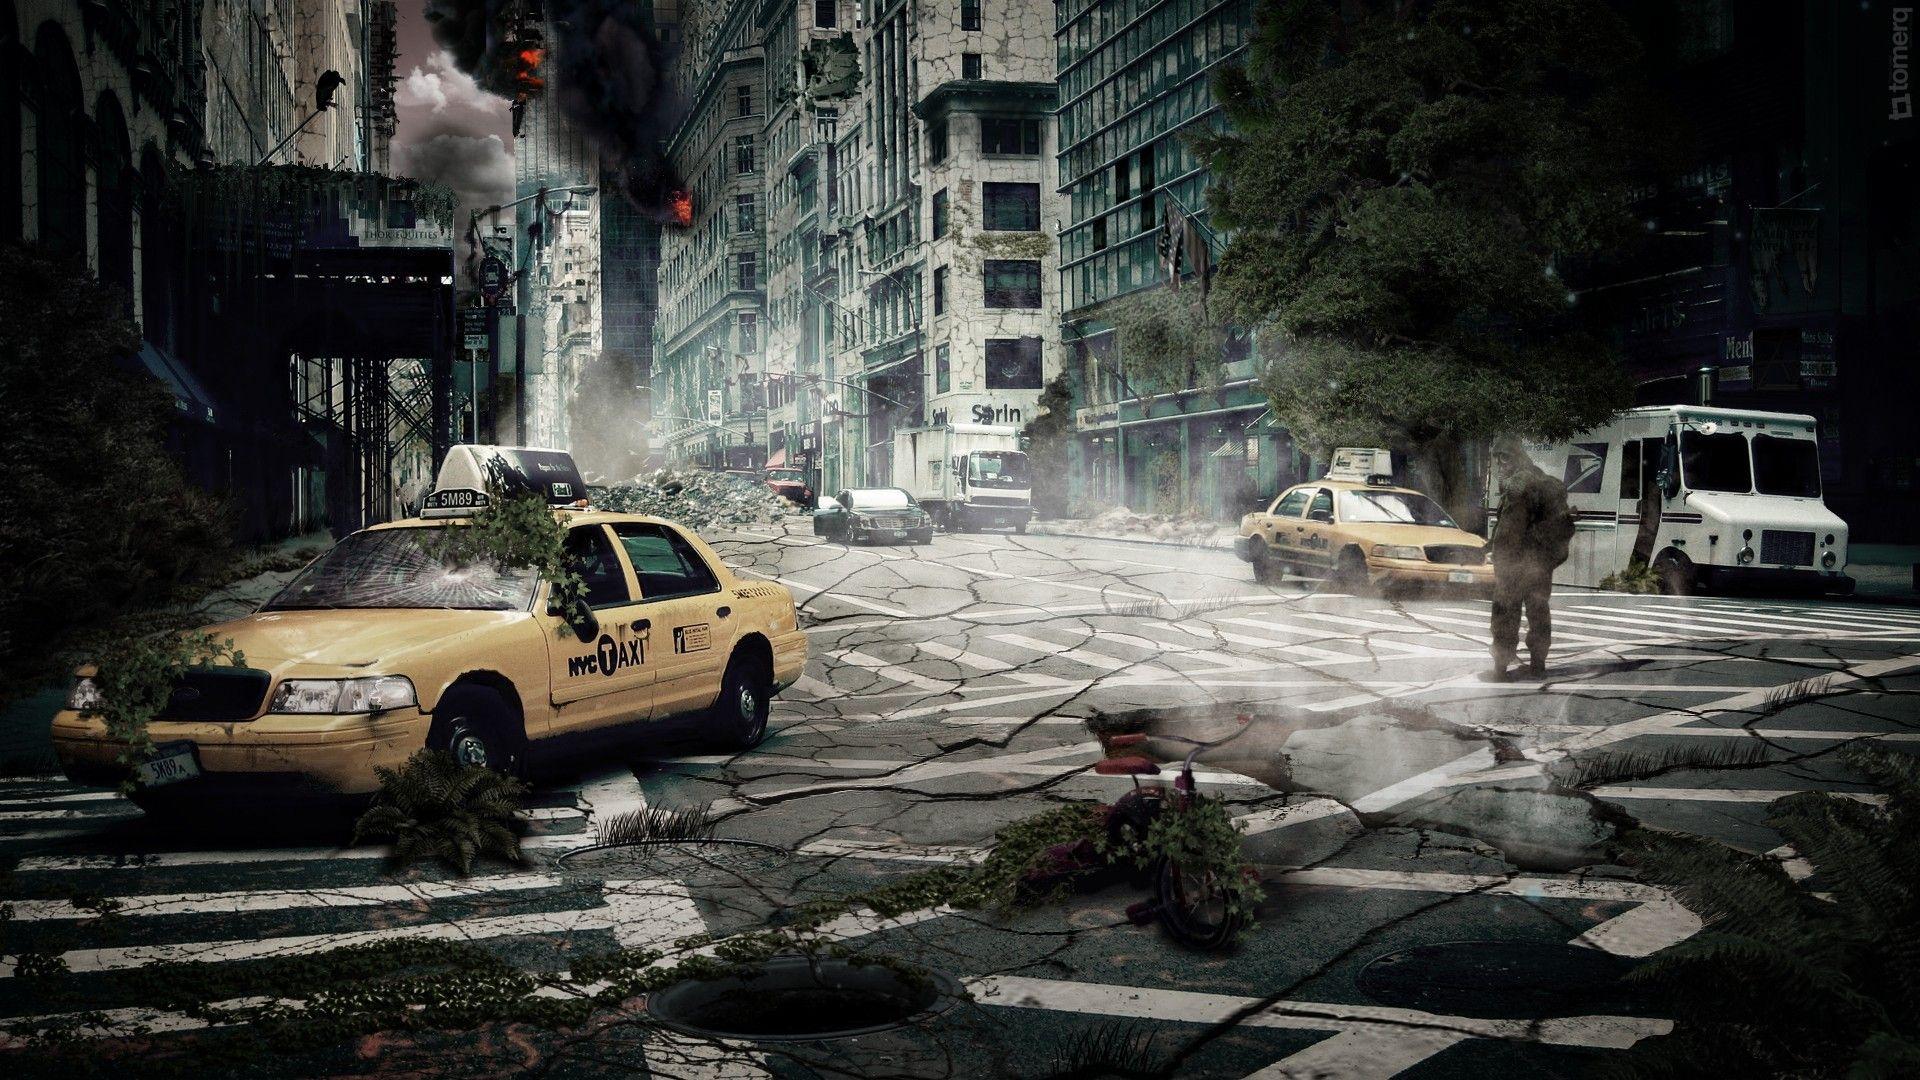 cityscapes, streets, end of the world, New York City, taxi